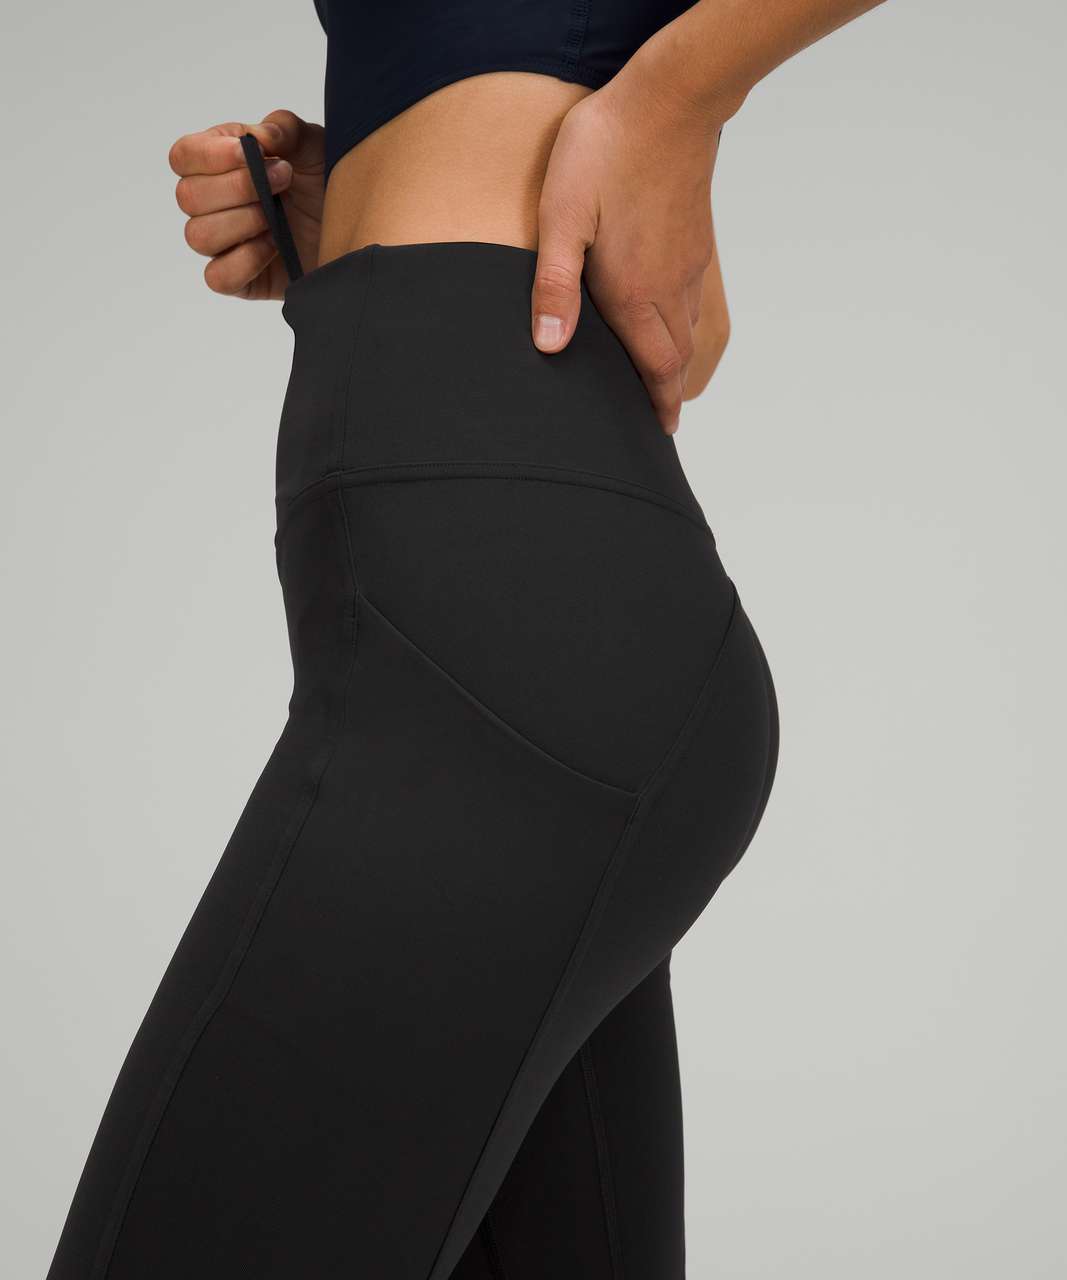 Lululemon All the Right Places High-Rise Crop 23" - Black